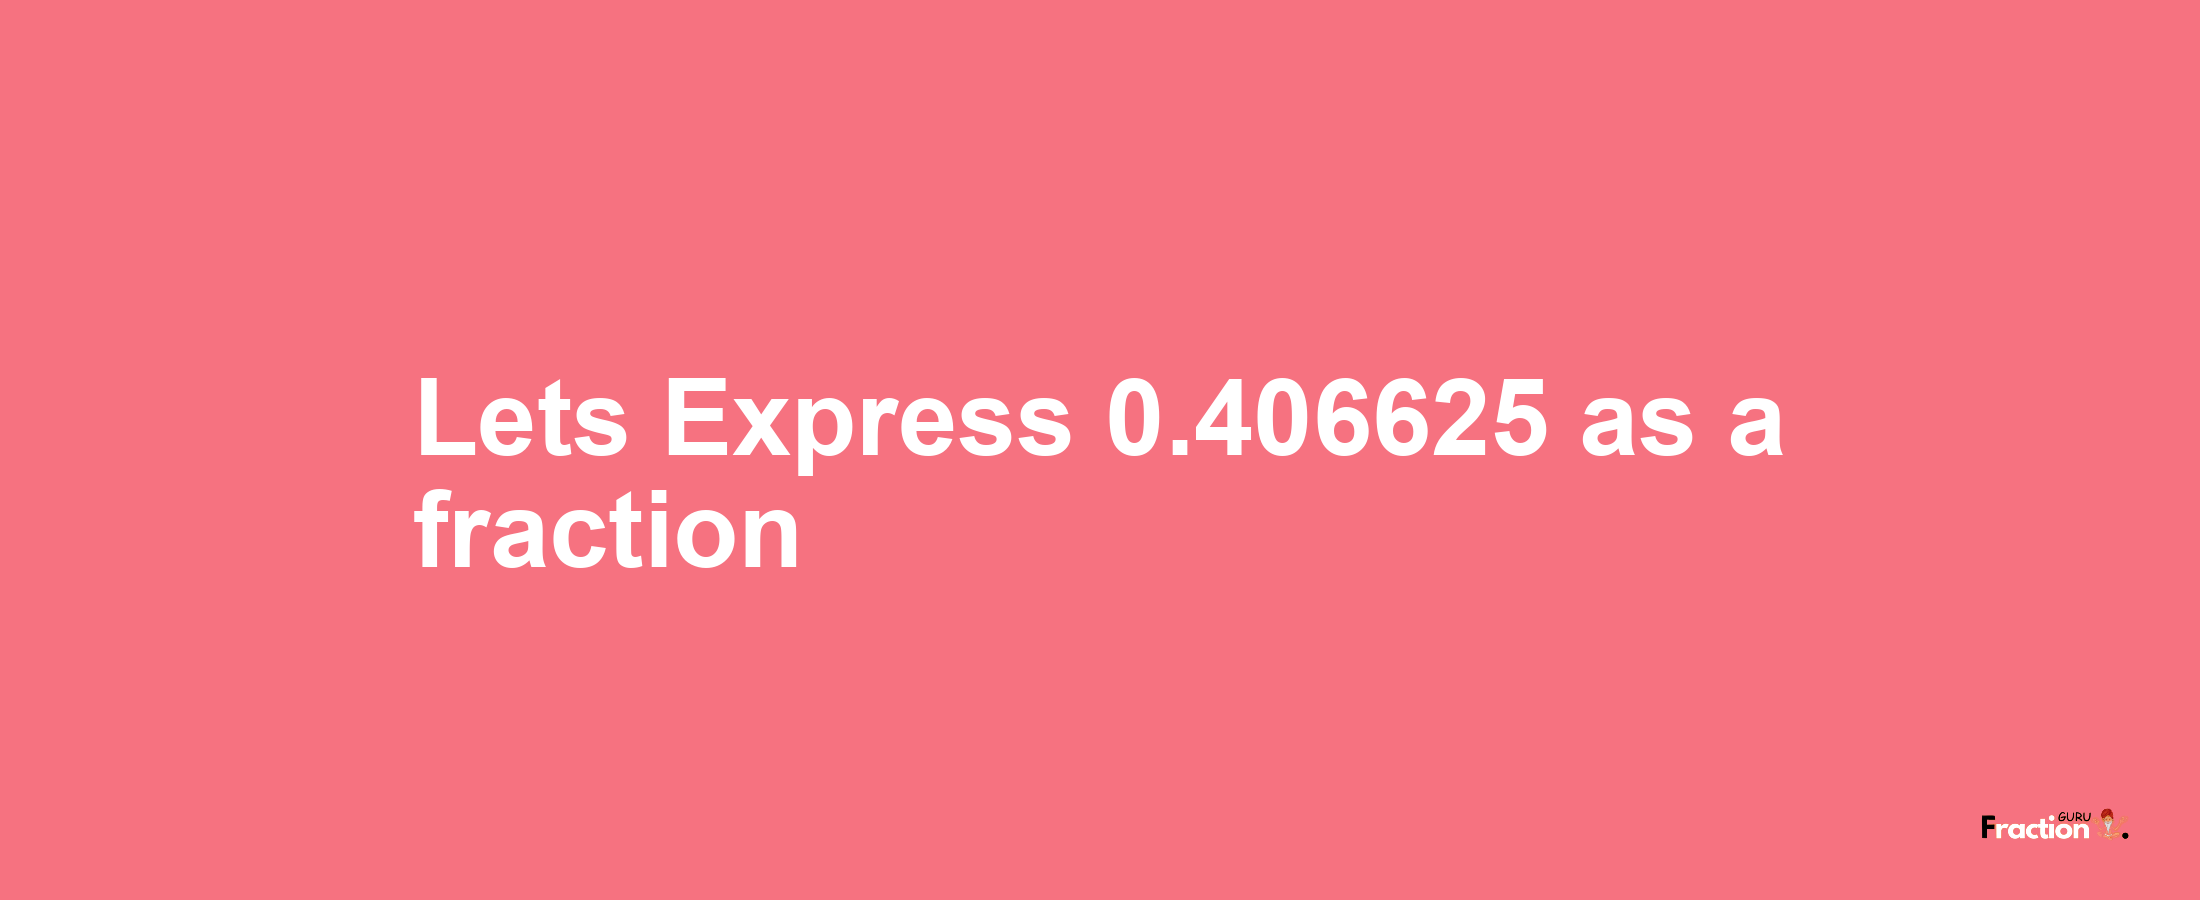 Lets Express 0.406625 as afraction